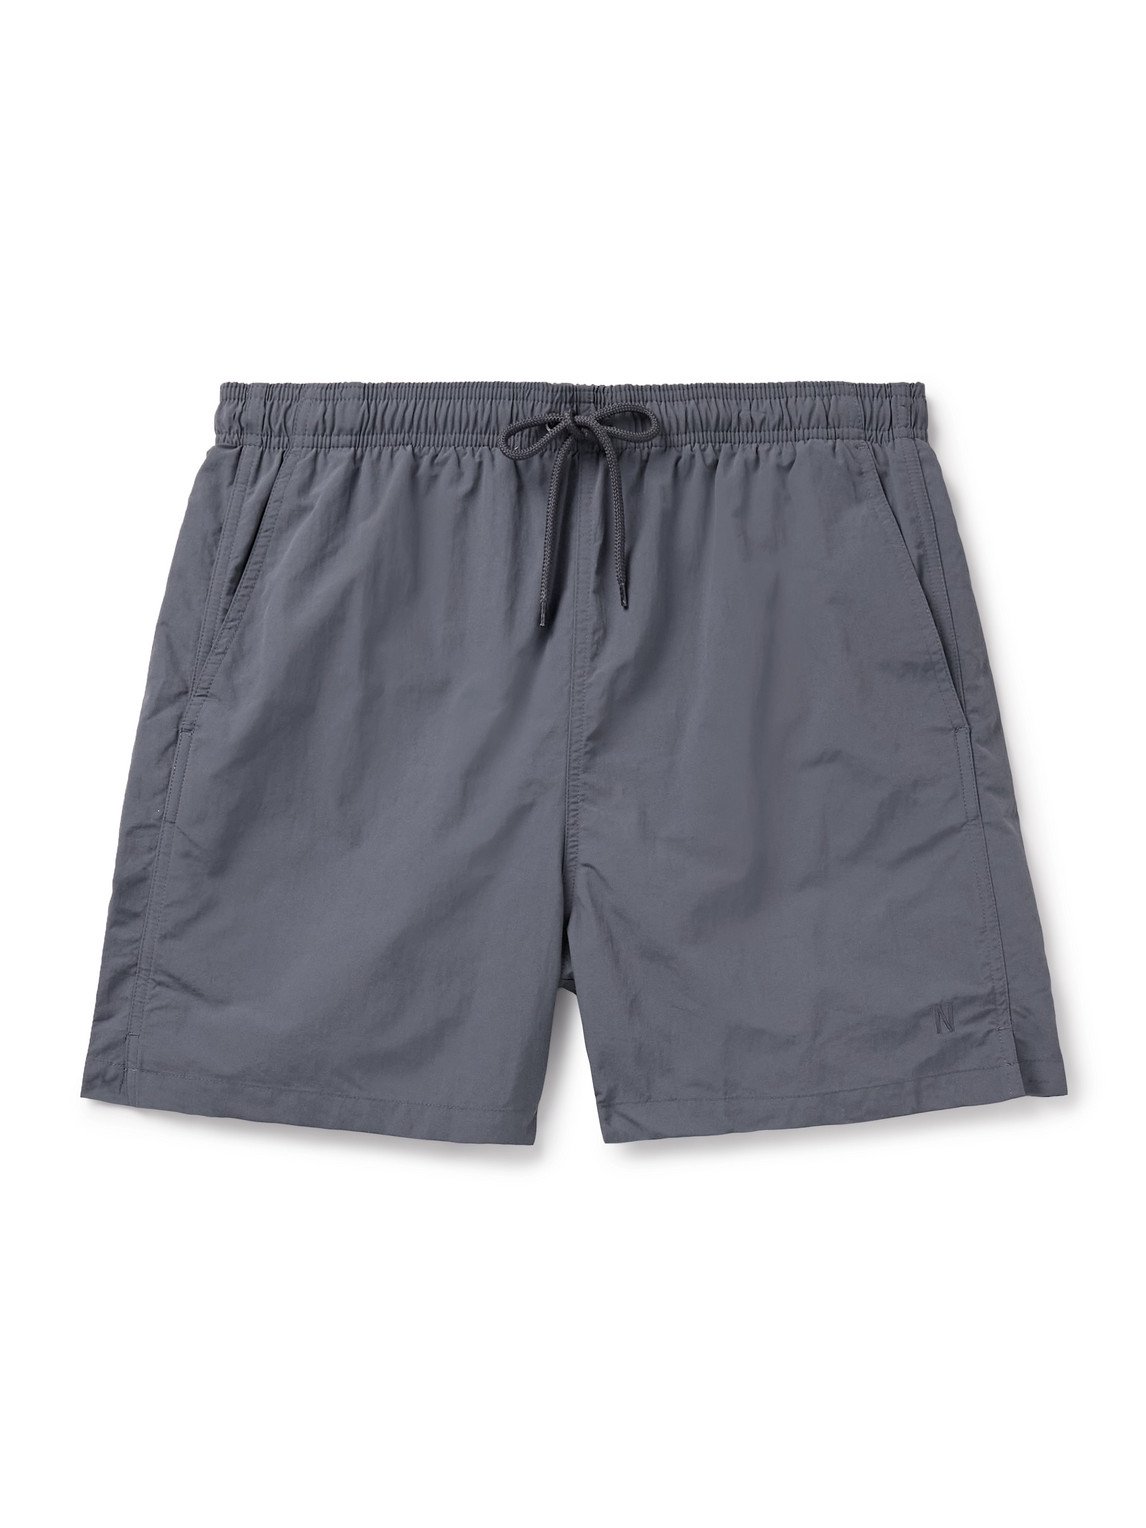 NORSE PROJECTS HAUGE STRAIGHT-LEG MID-LENGTH RECYCLED SWIM SHORTS